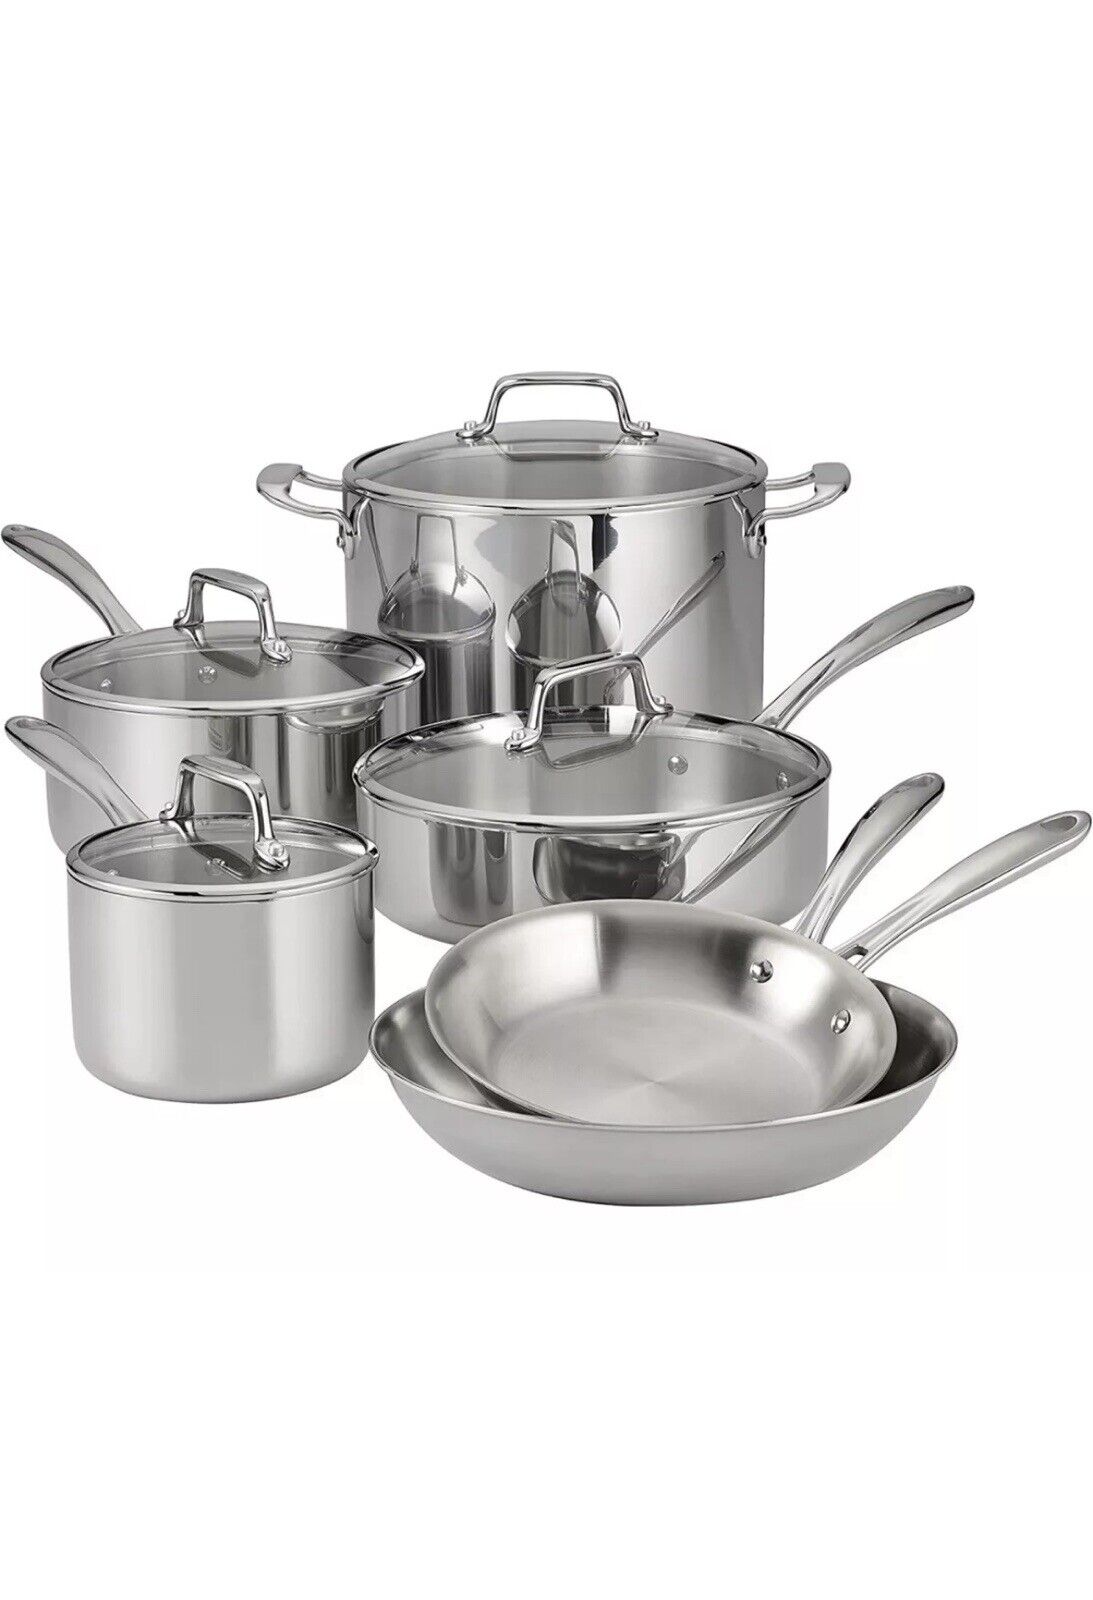 Tramontina 10-Piece Tri-Ply Clad Stainless Steel Cookware Set, with Glass Lids